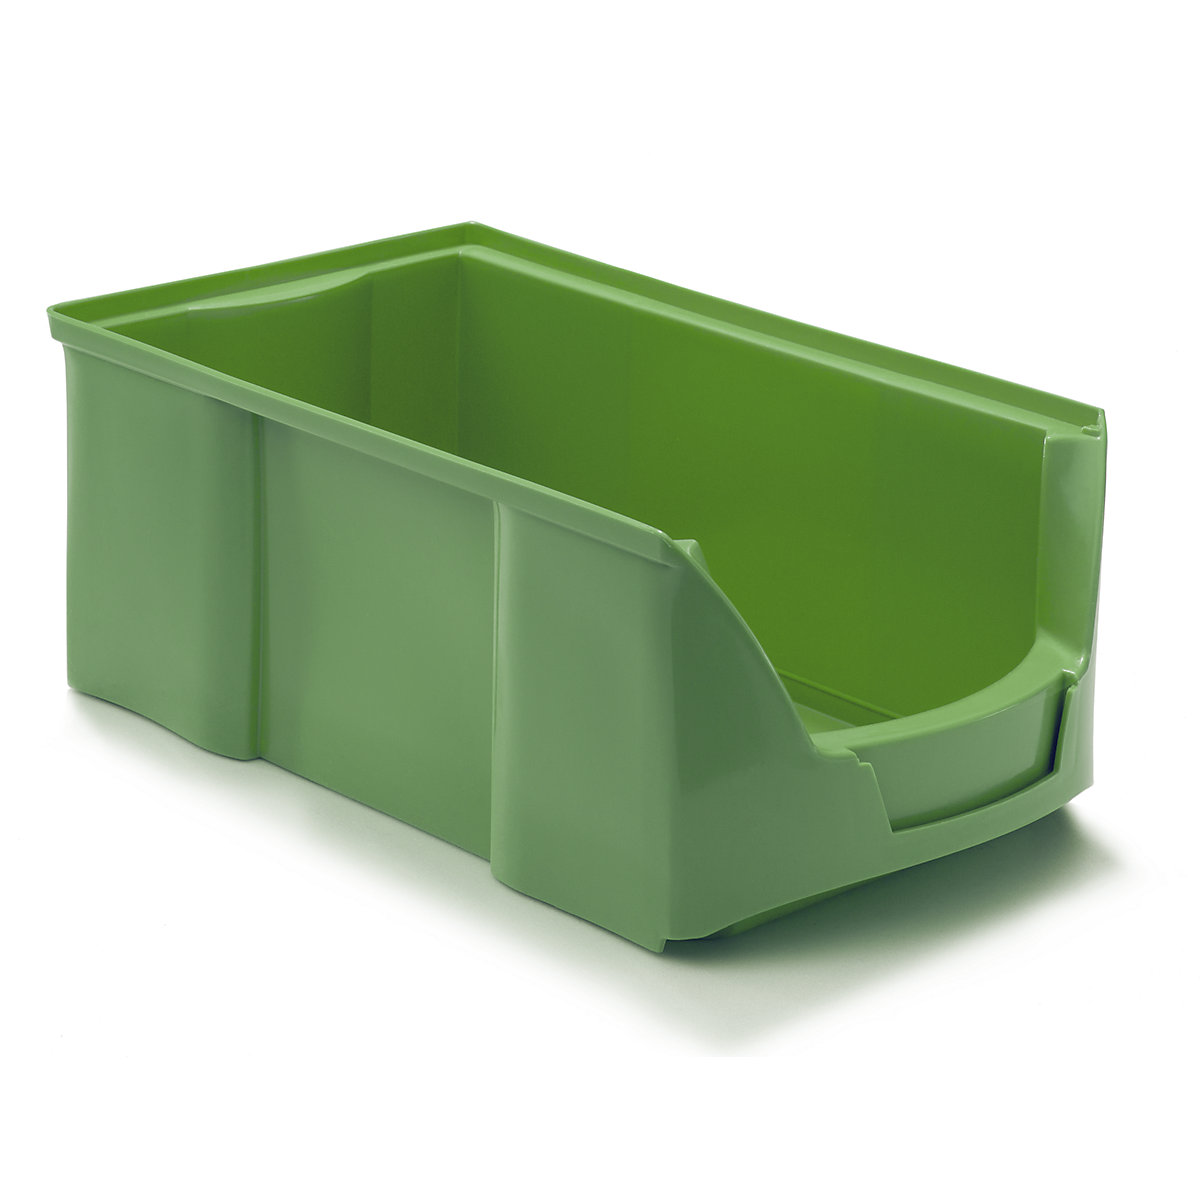 FUTURA open fronted storage bin made of polyethylene, LxWxH 360 x 208 x 147 mm, pack of 12, green-16